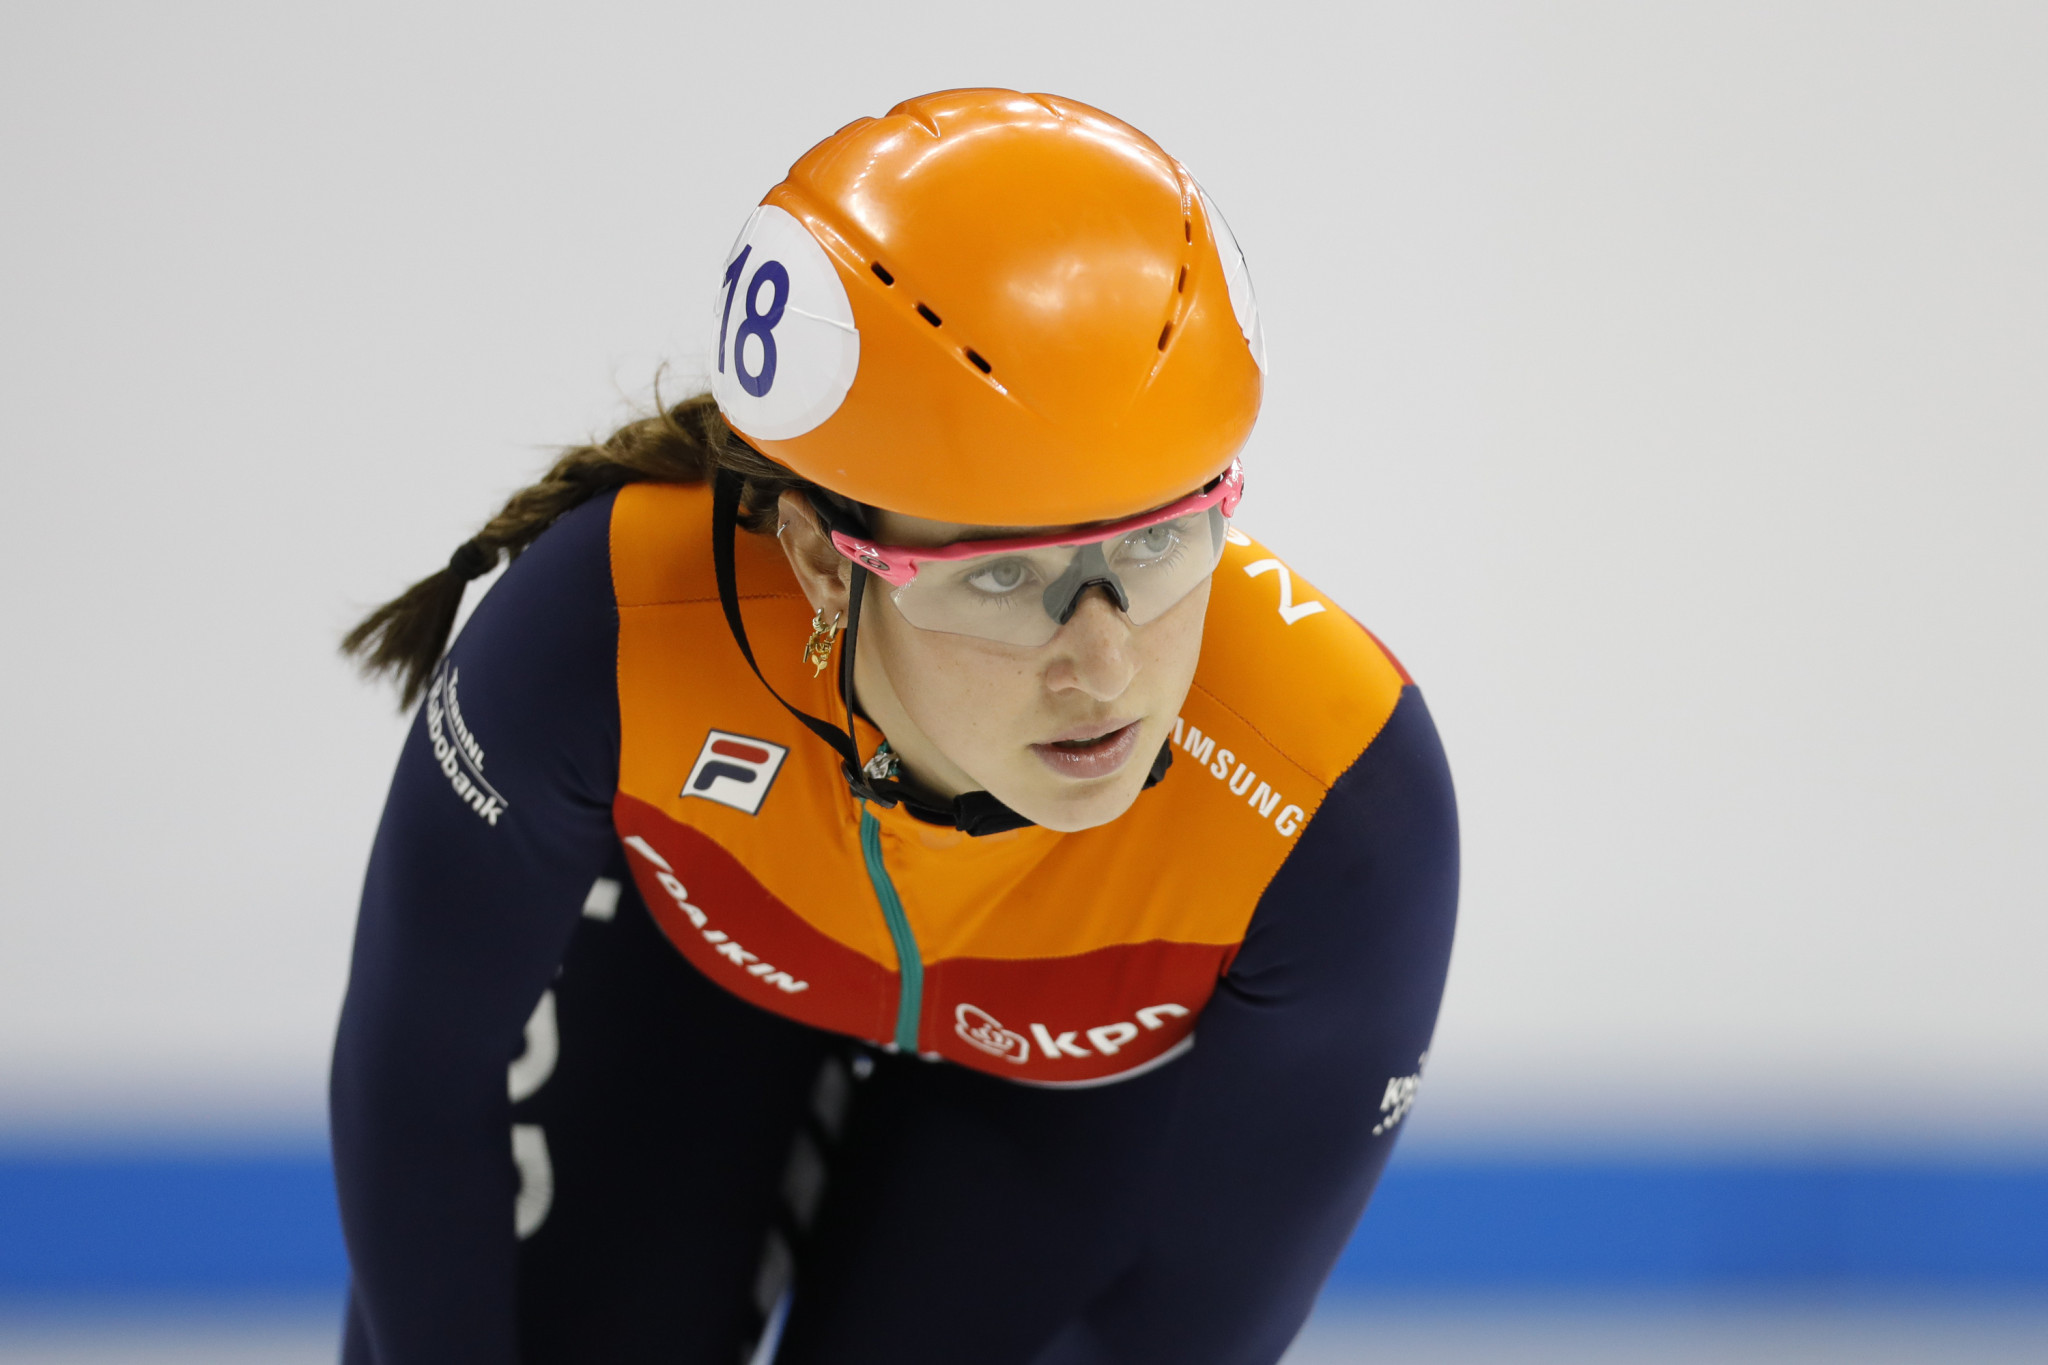 Suzanne Schulting of The Netherlands recorded the fastest qualifying time in the women's 500m event ©Getty Images